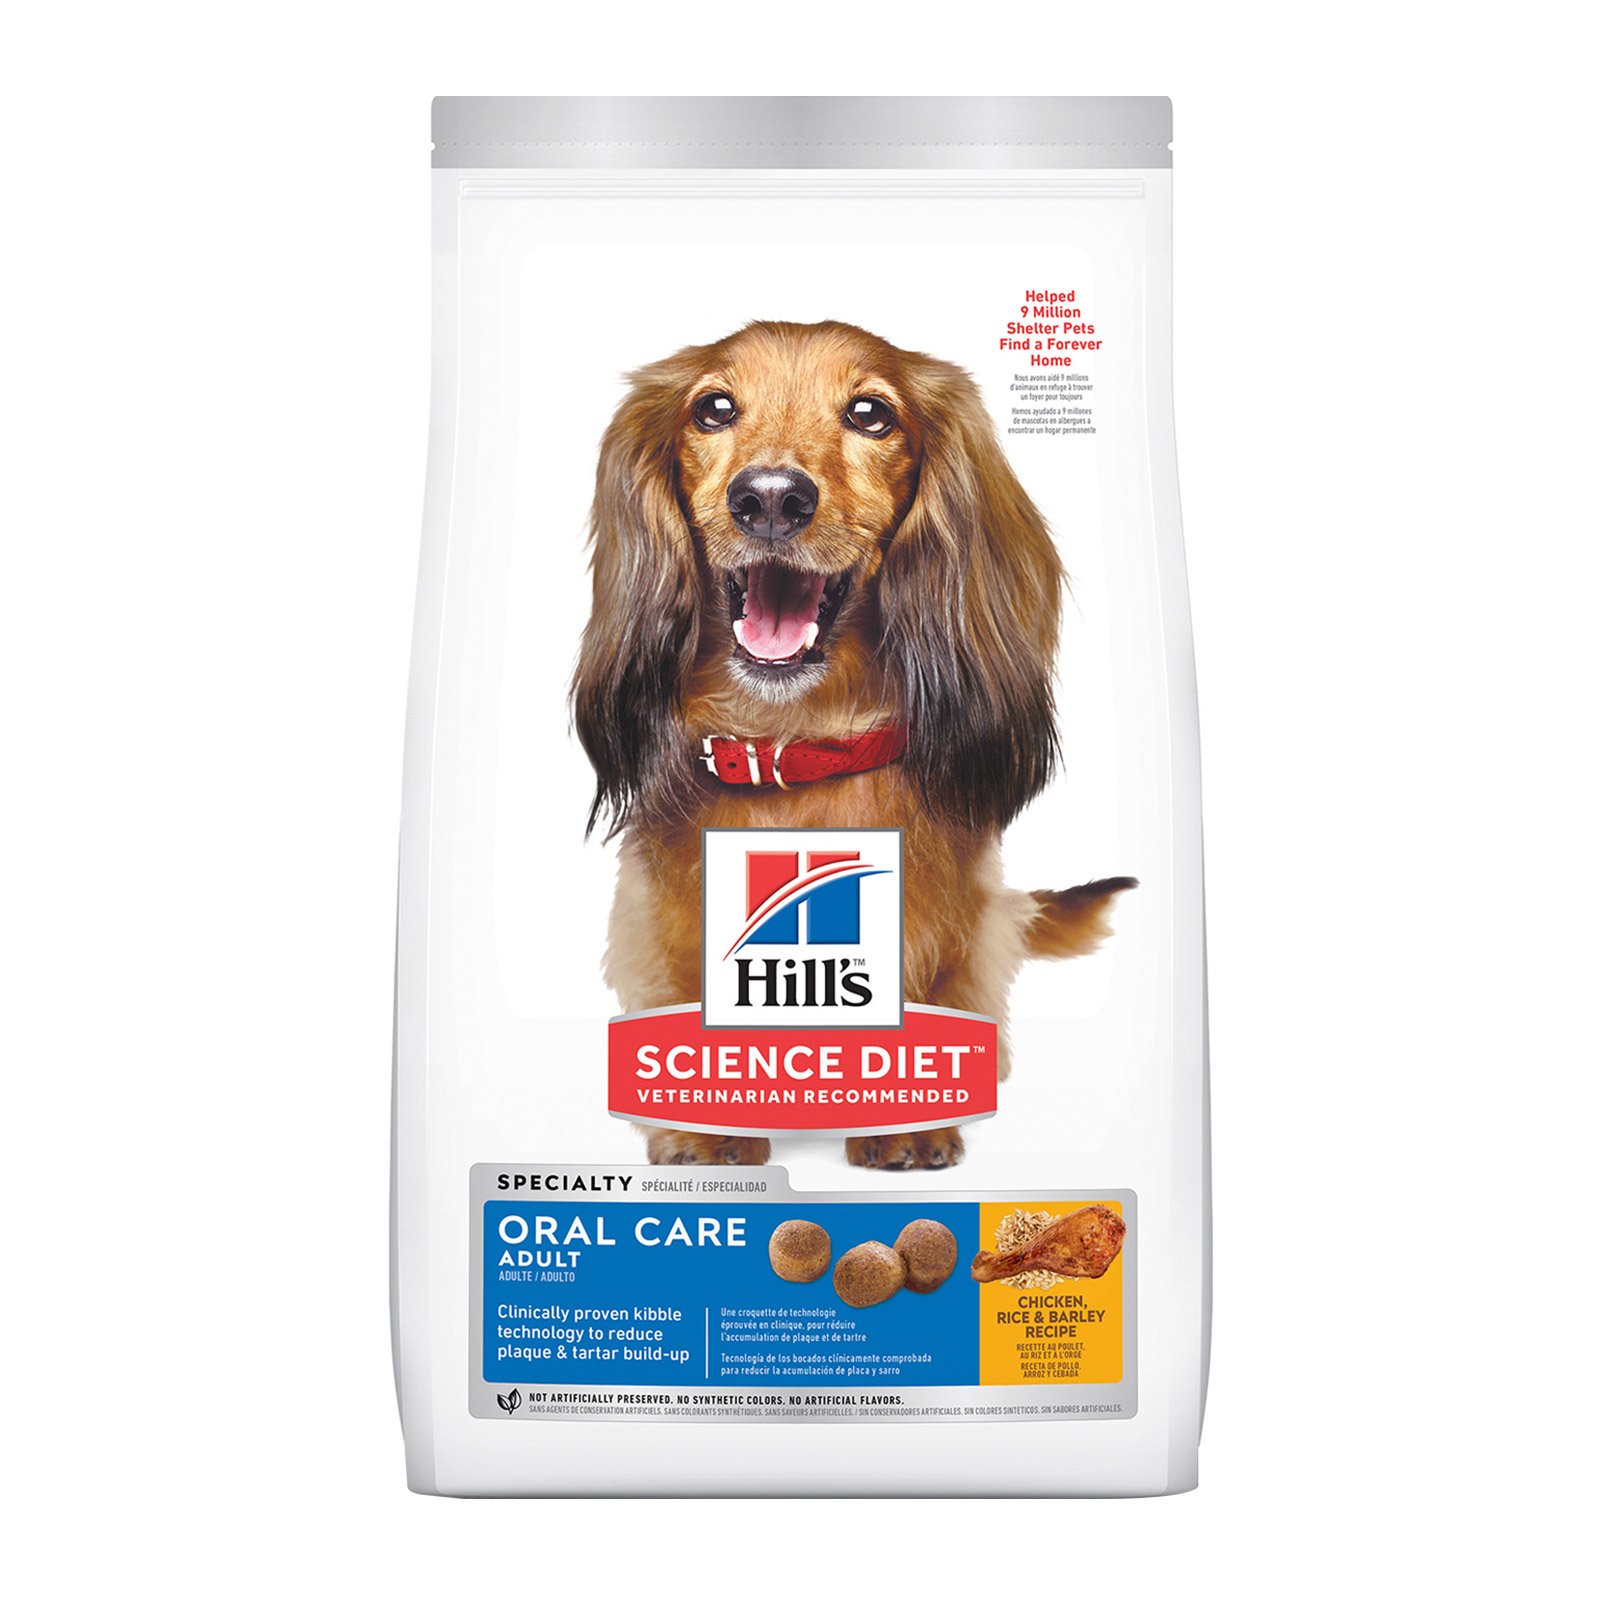 Hill's Science Diet Adult Oral Care Chicken, Rice & Barley Dry Dog Food  